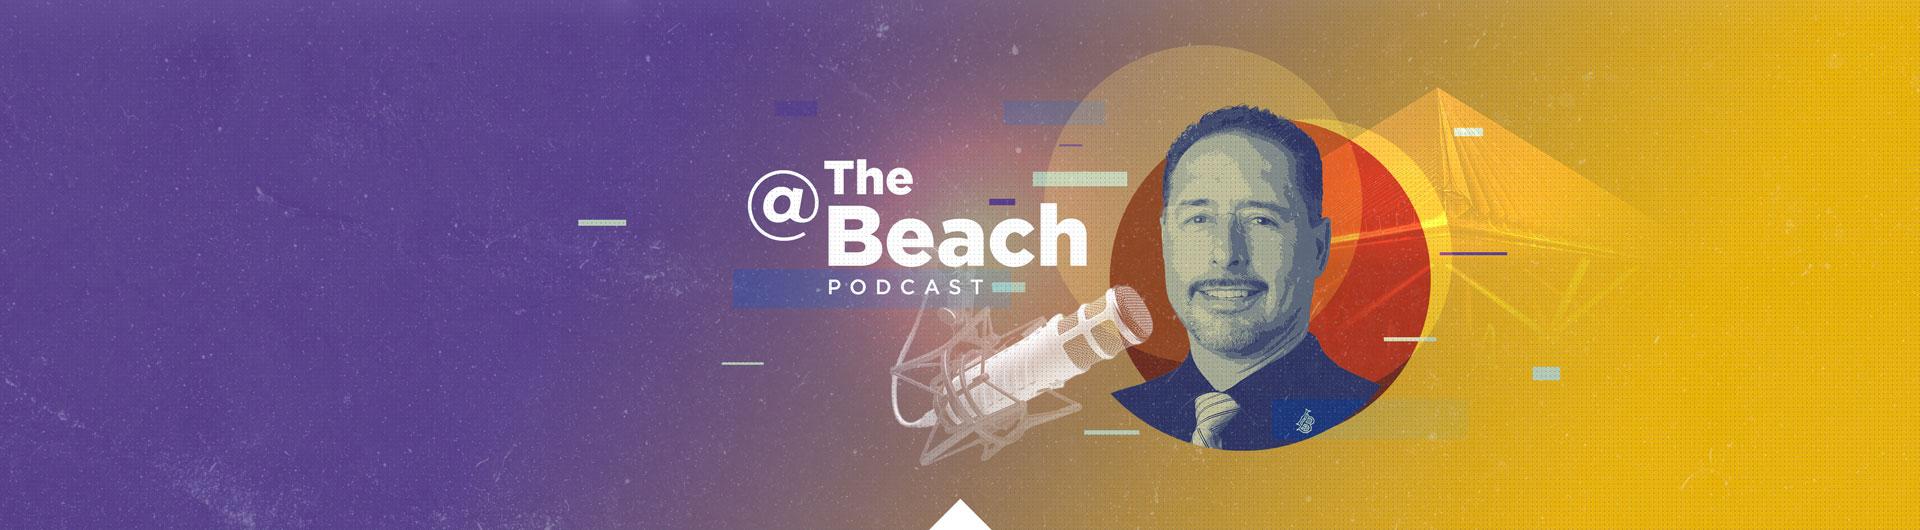 The @The Beach Podcast Logo, showing Vice President of University Relations and Development Dan Montoya with a microphone graphic